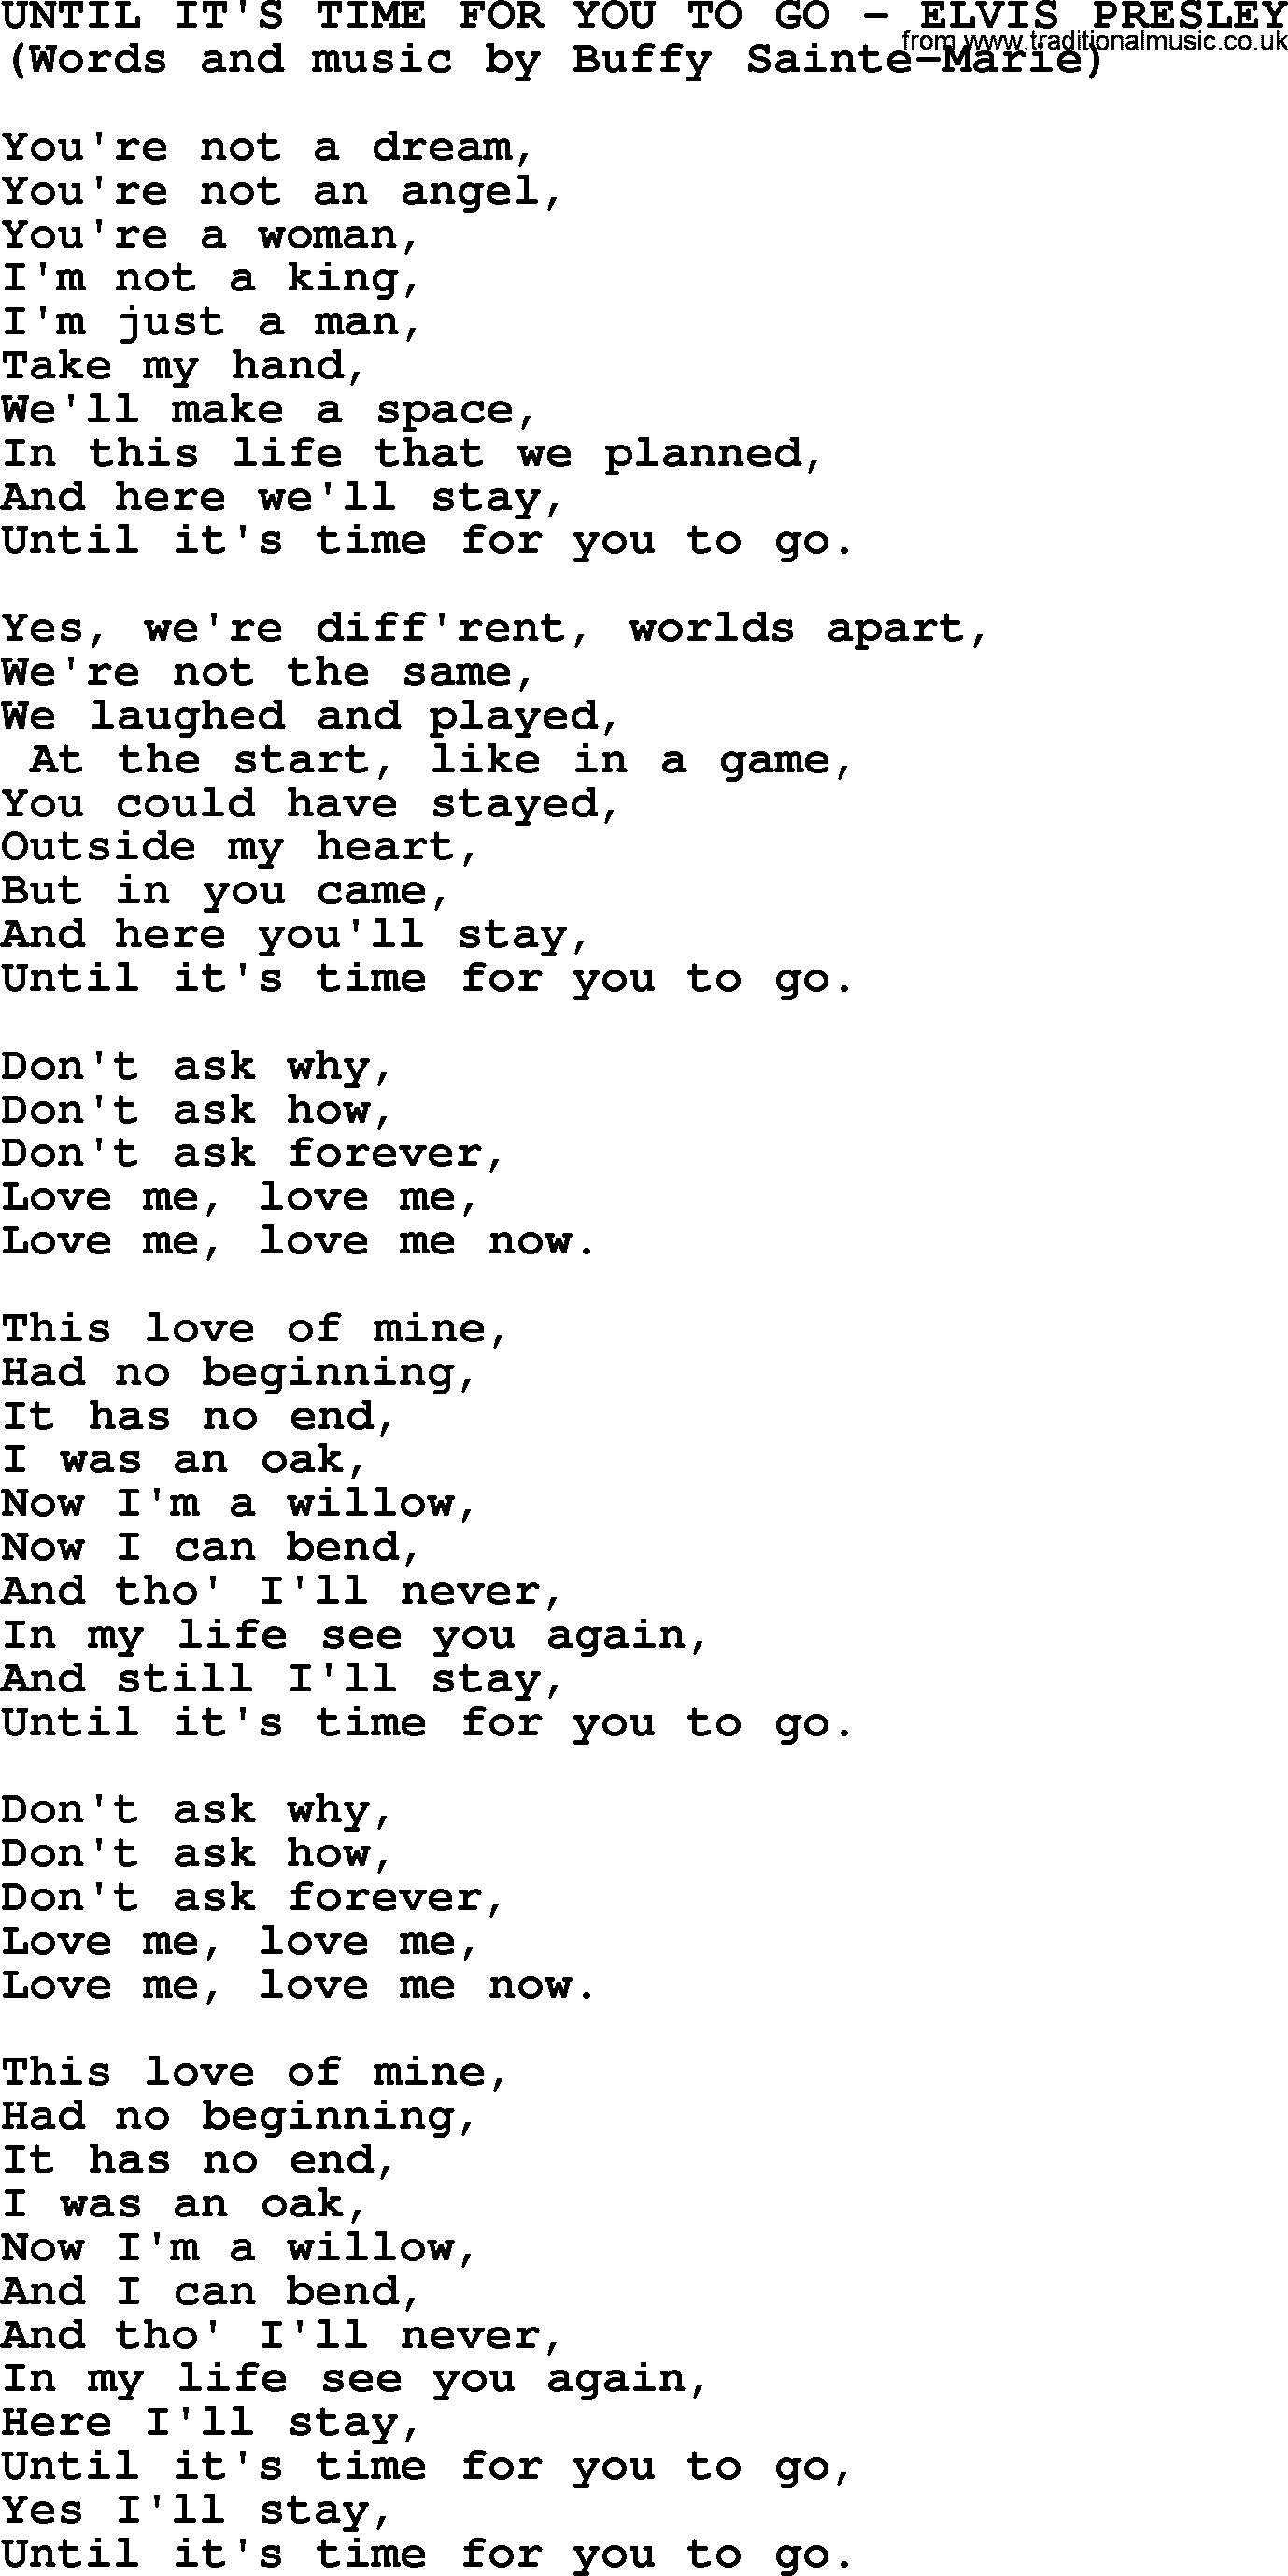 Elvis Presley song: Until It's Time For You To Go lyrics